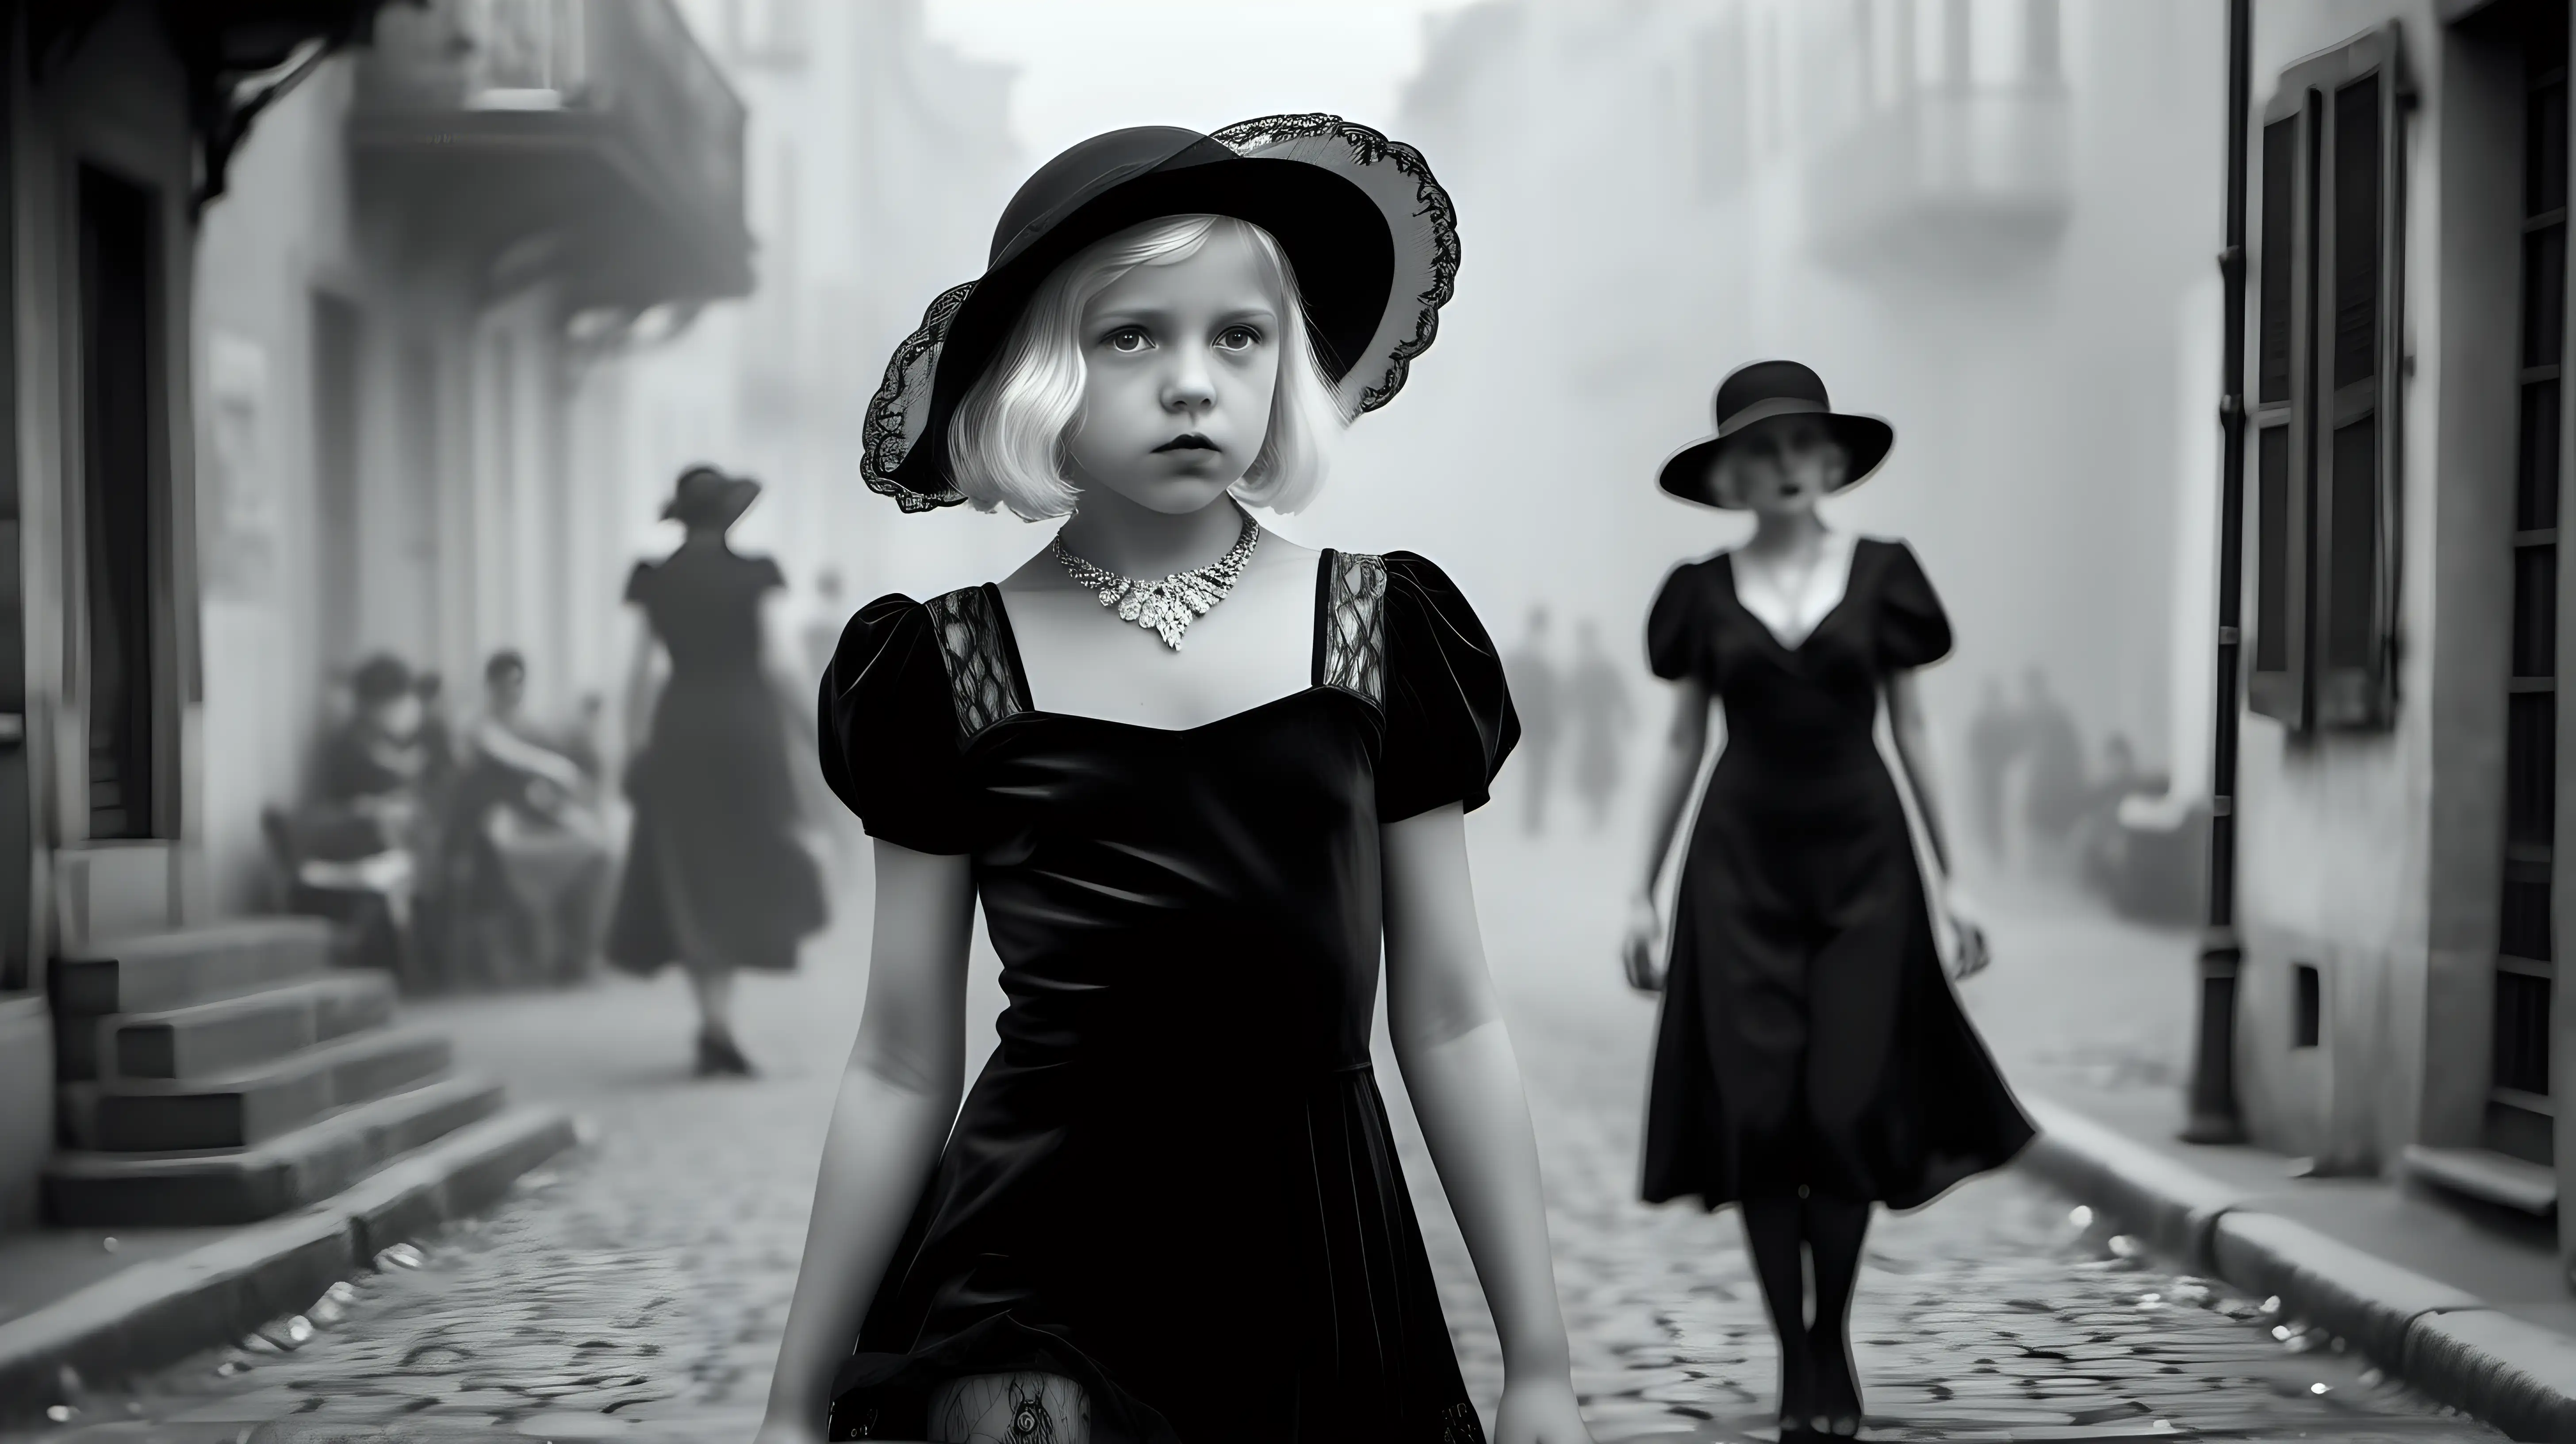 Elegant 1930s Fashion Stroll Wealthy Young Girl in Noir Ambiance